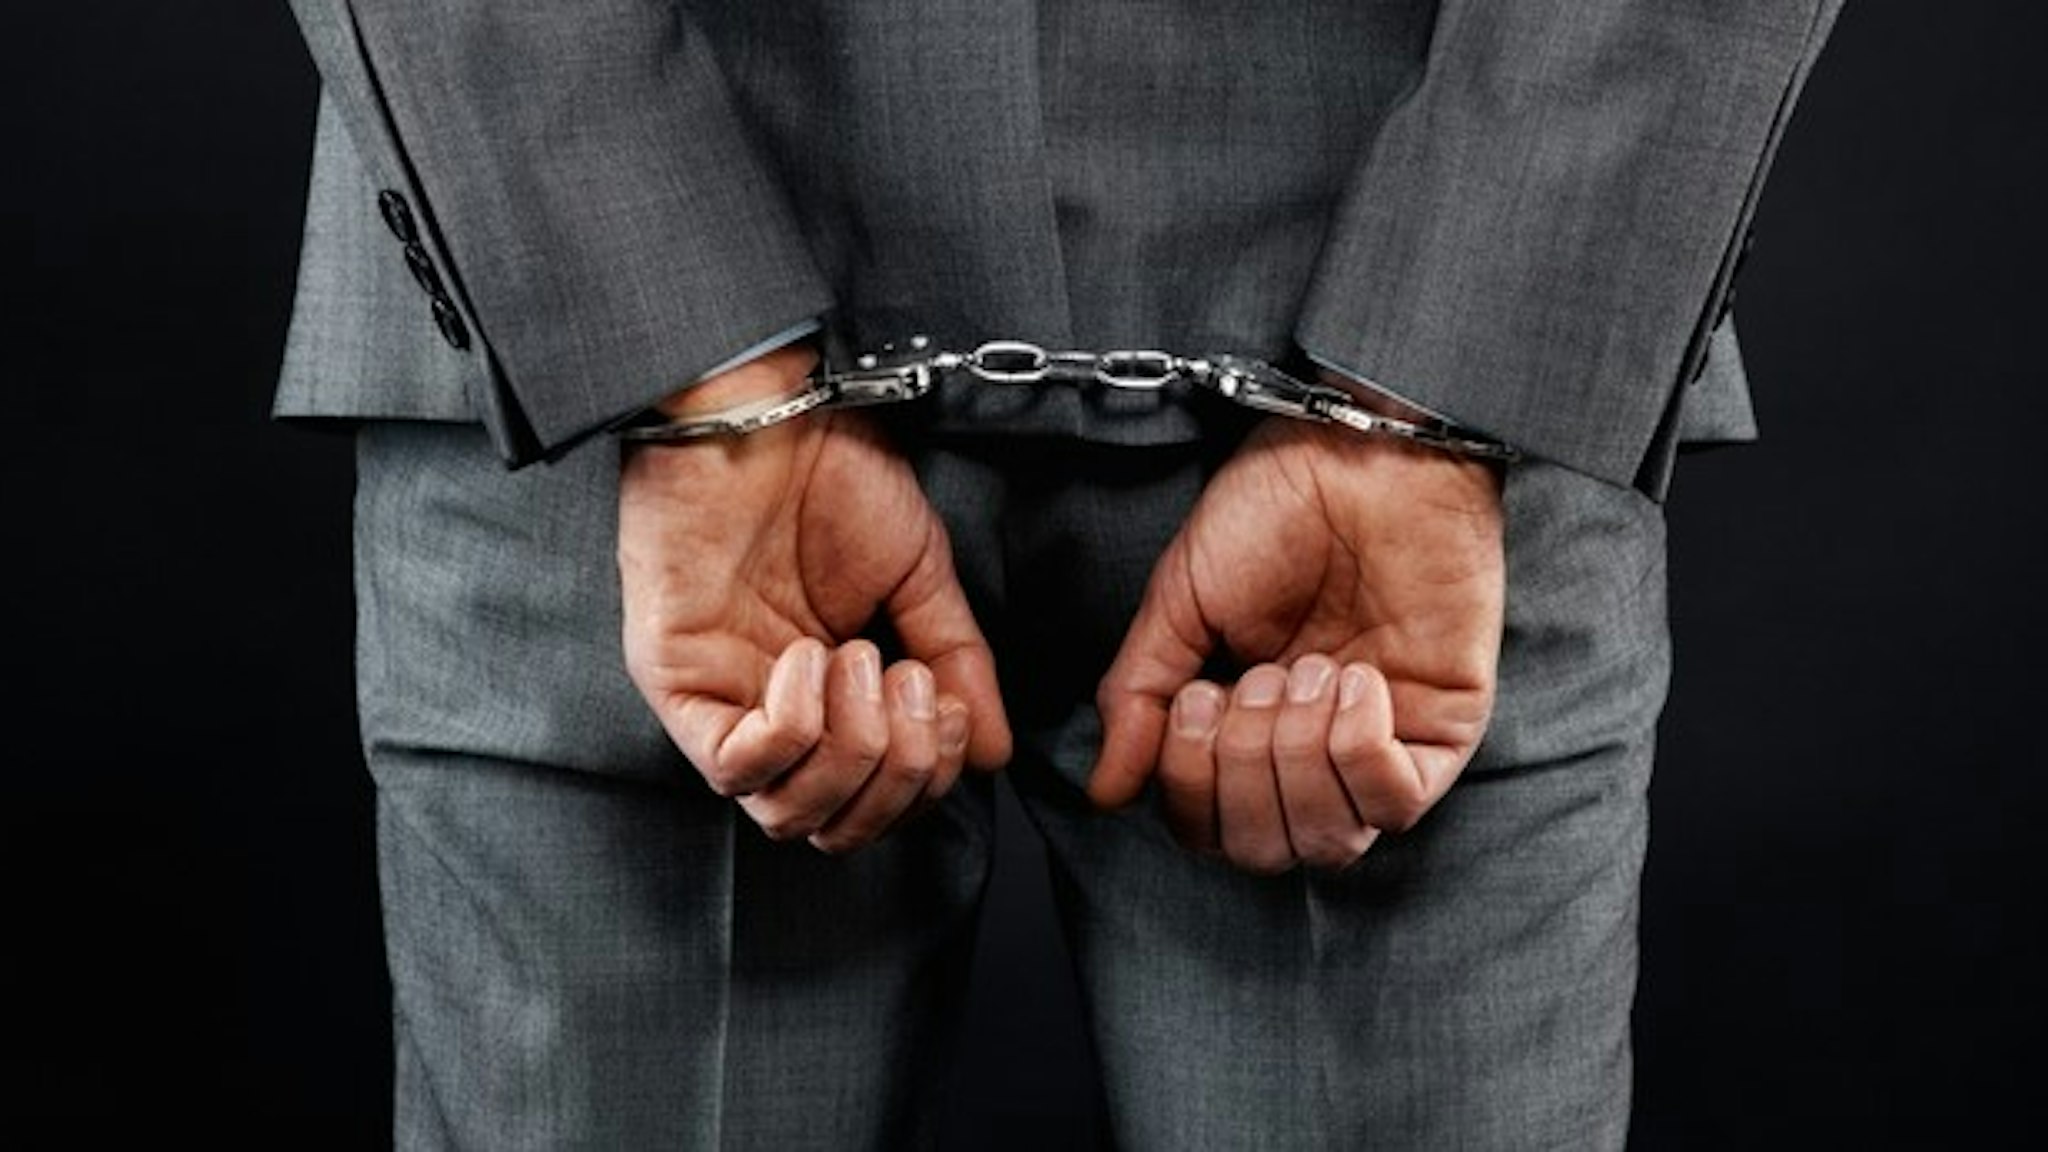 Rear view of man in suit wearing handcuffs